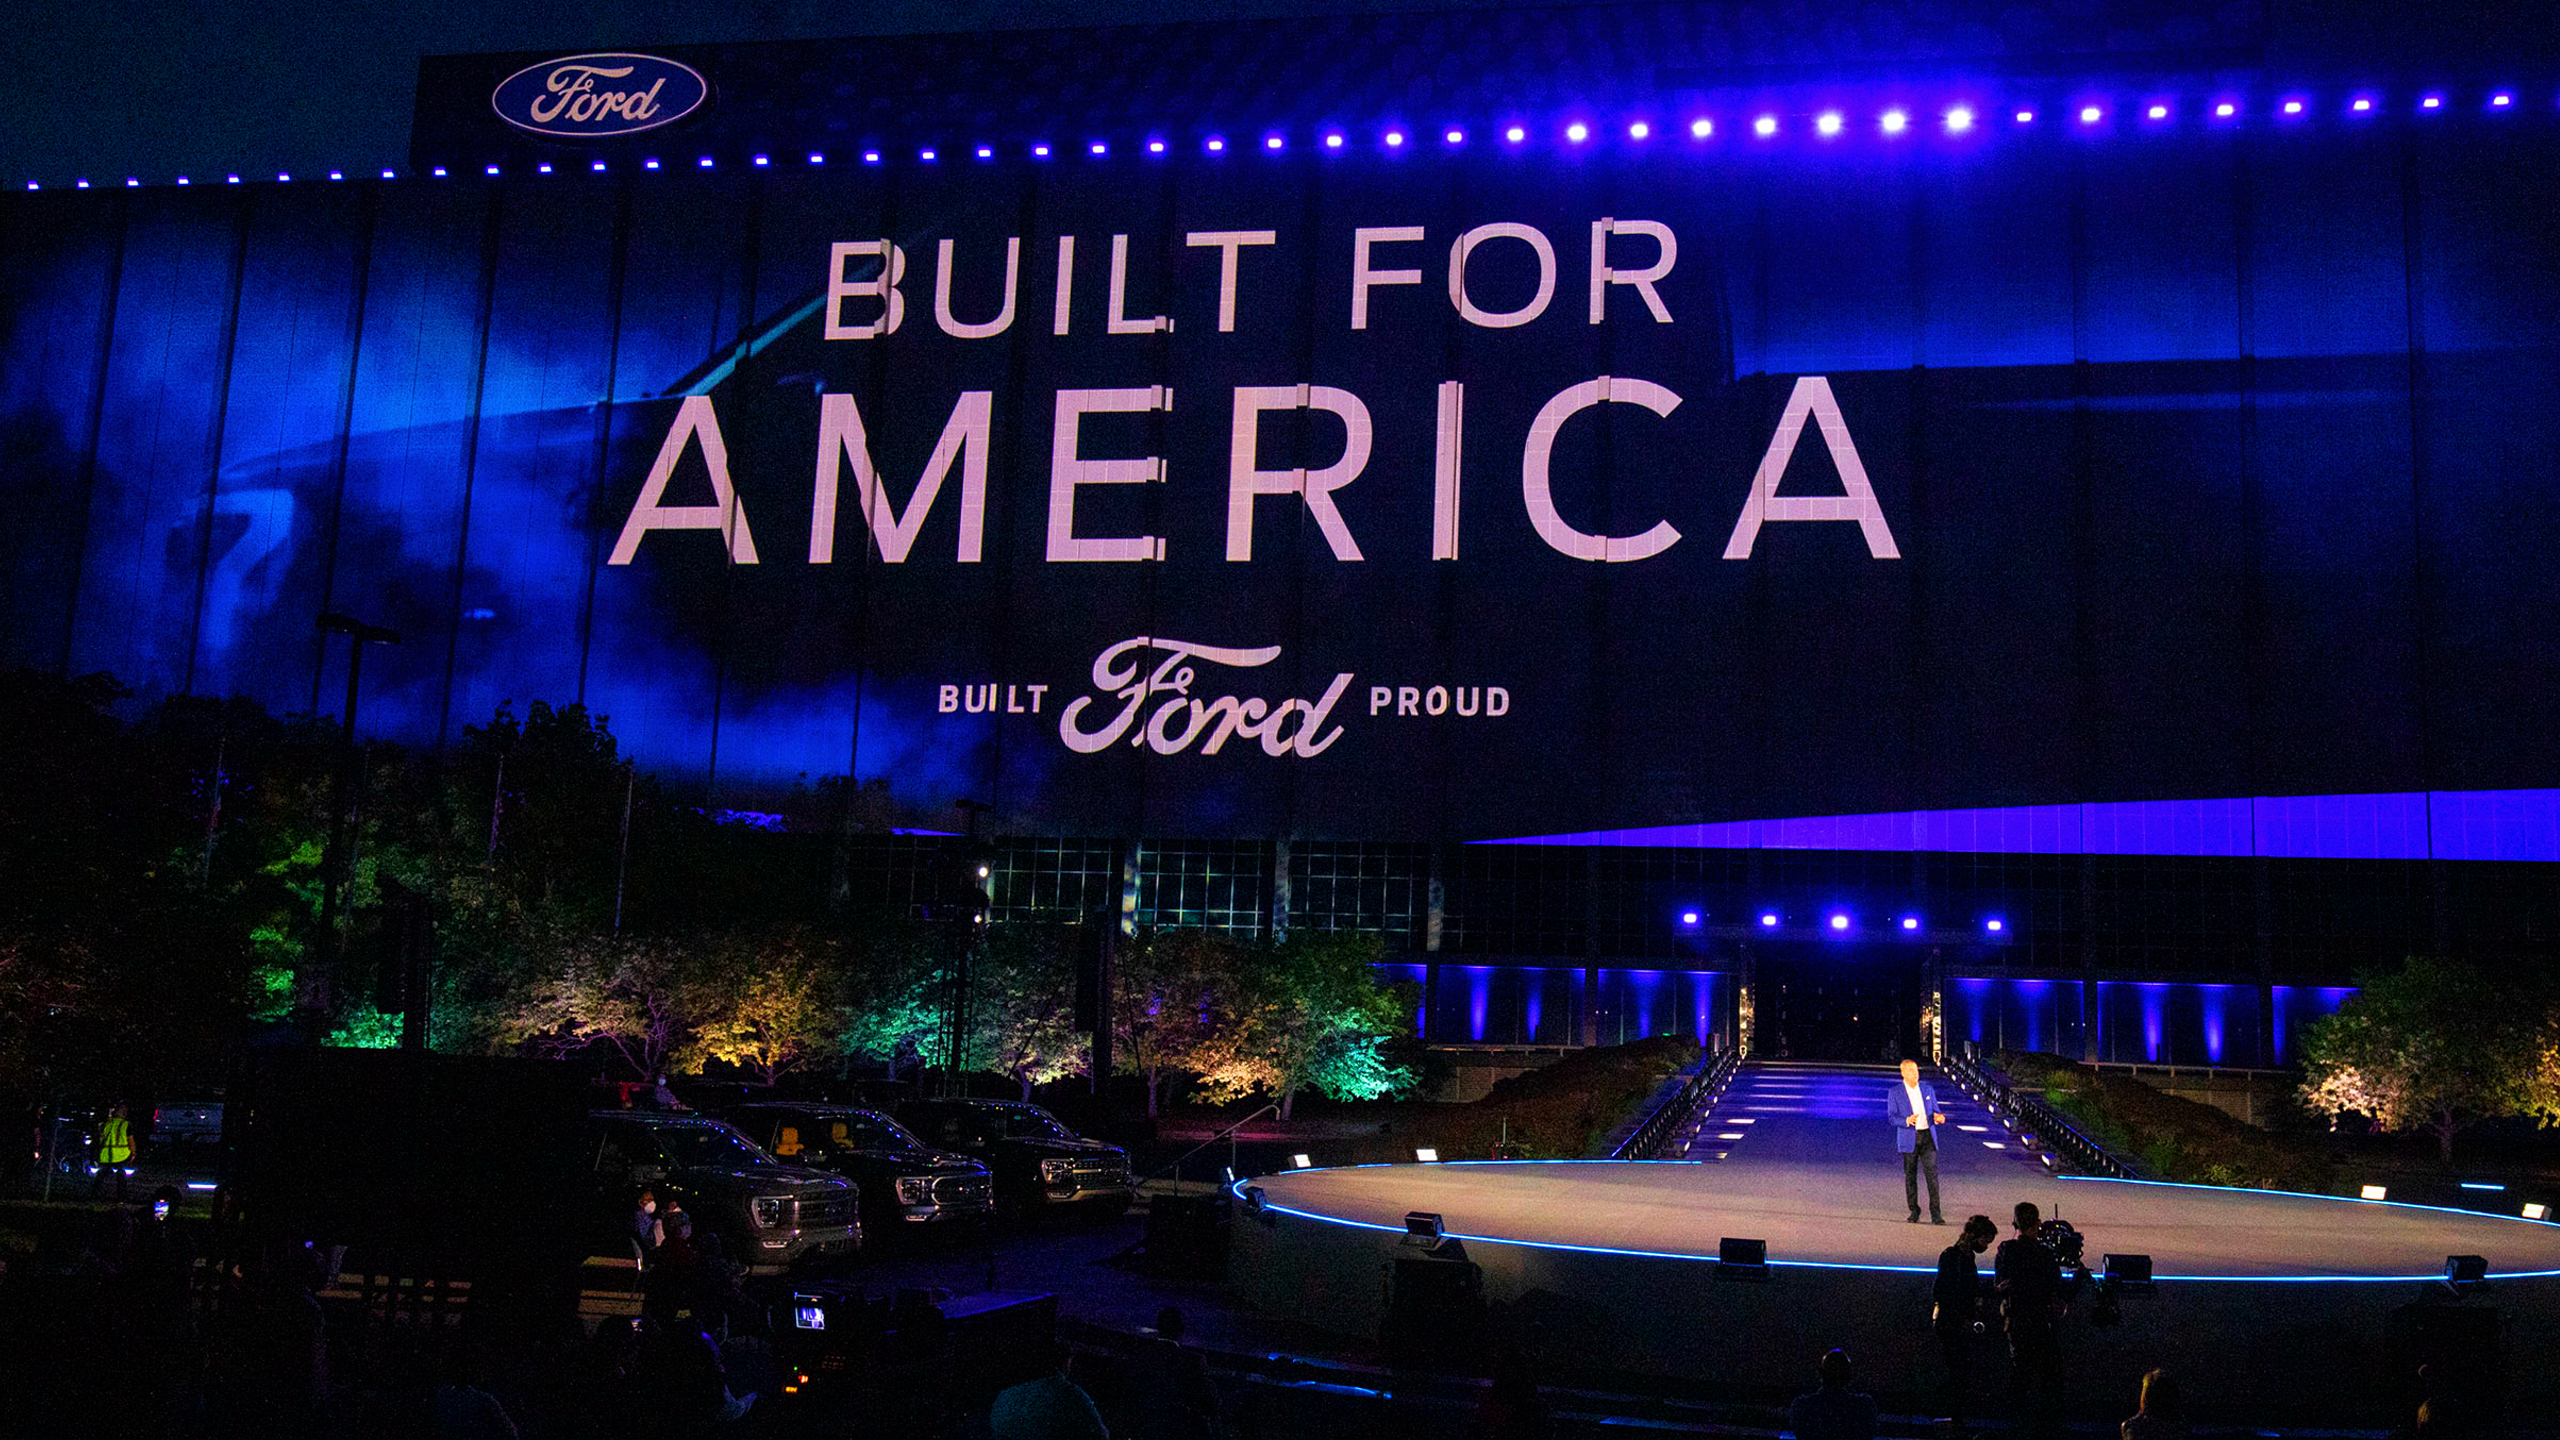 The reveal of the new all-electric Ford F-150 Lightning pickup truck at Ford World Headquarters on May 19, 2021 in Dearborn, Michigan.